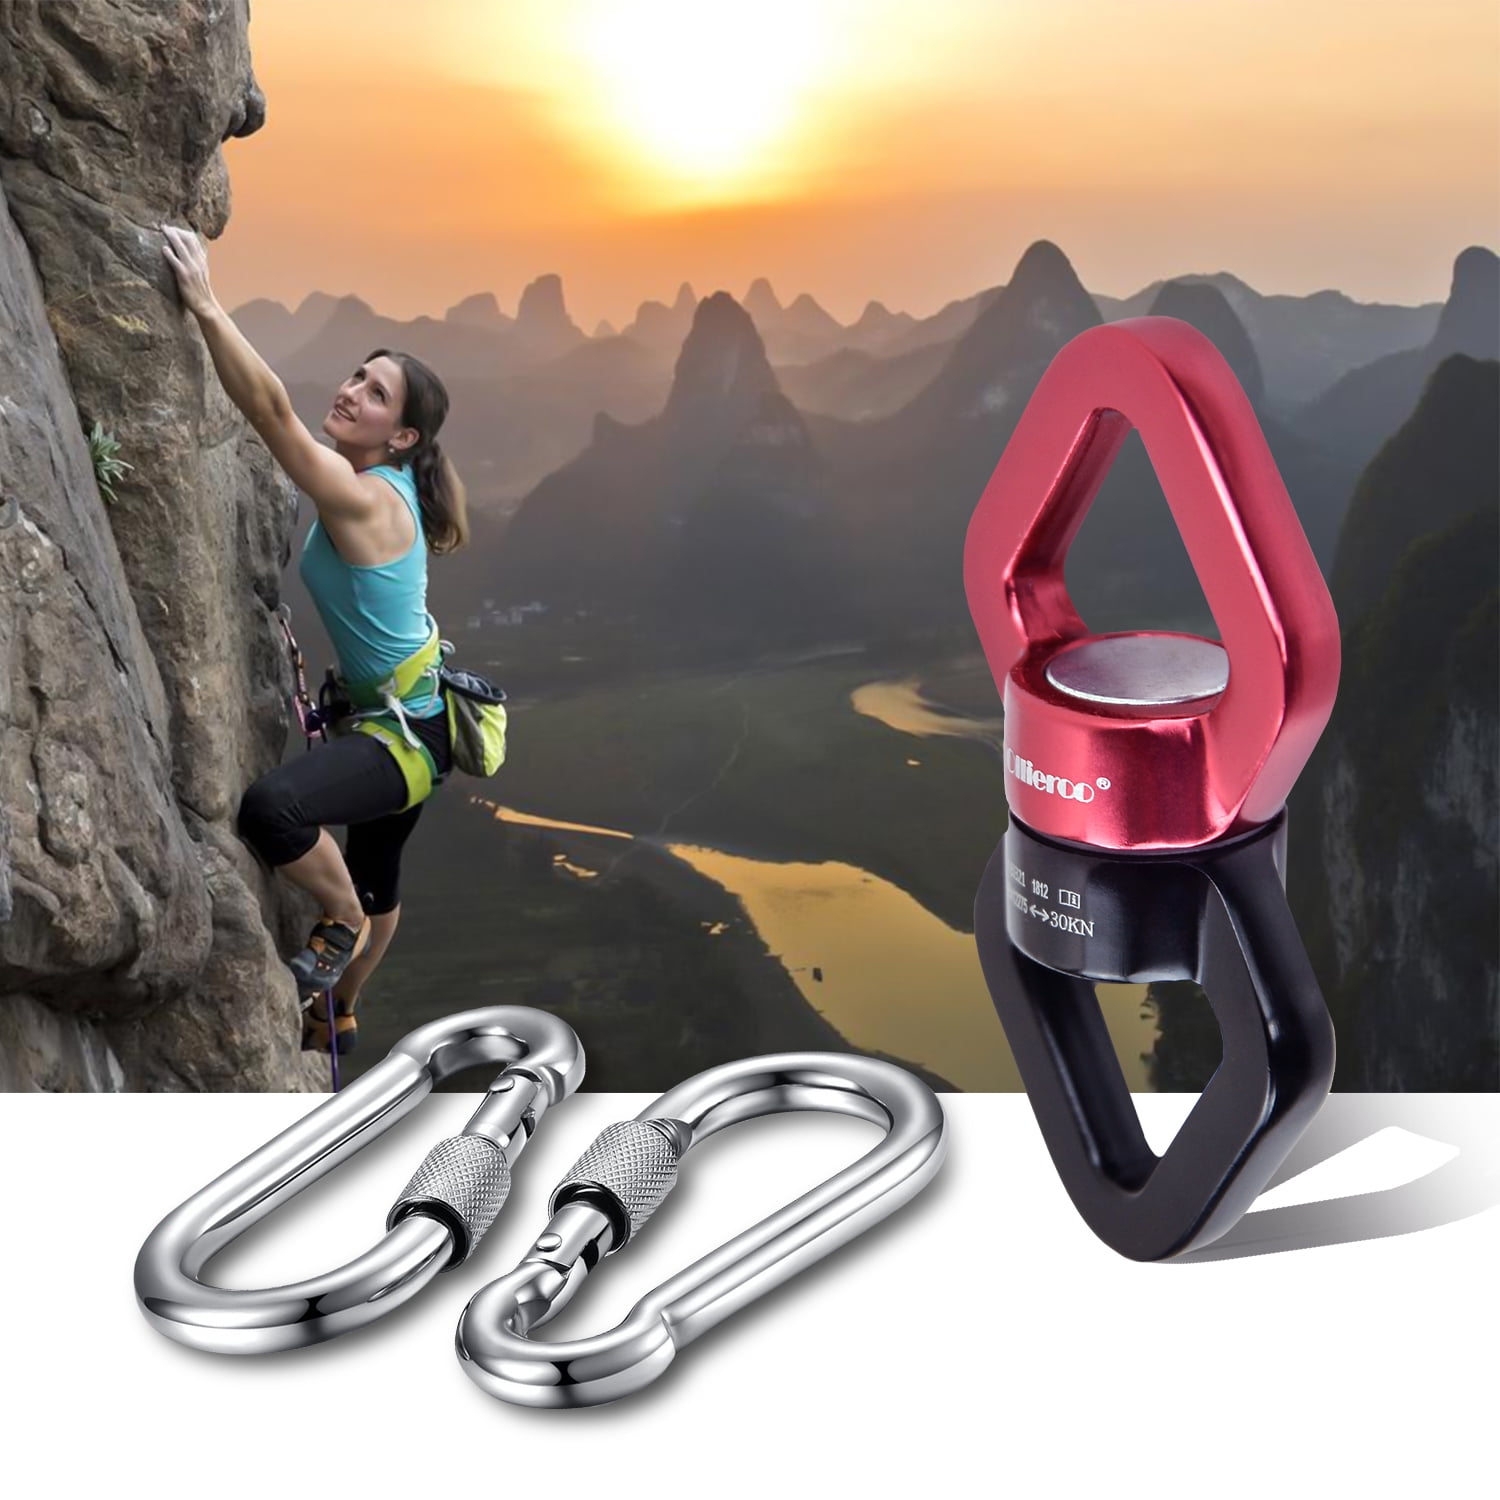 Man Climbing Hanging for Woman Good Toughness Light Weight Small Rope Pulleys Arborist Safety Rescue Hanging Accessory 